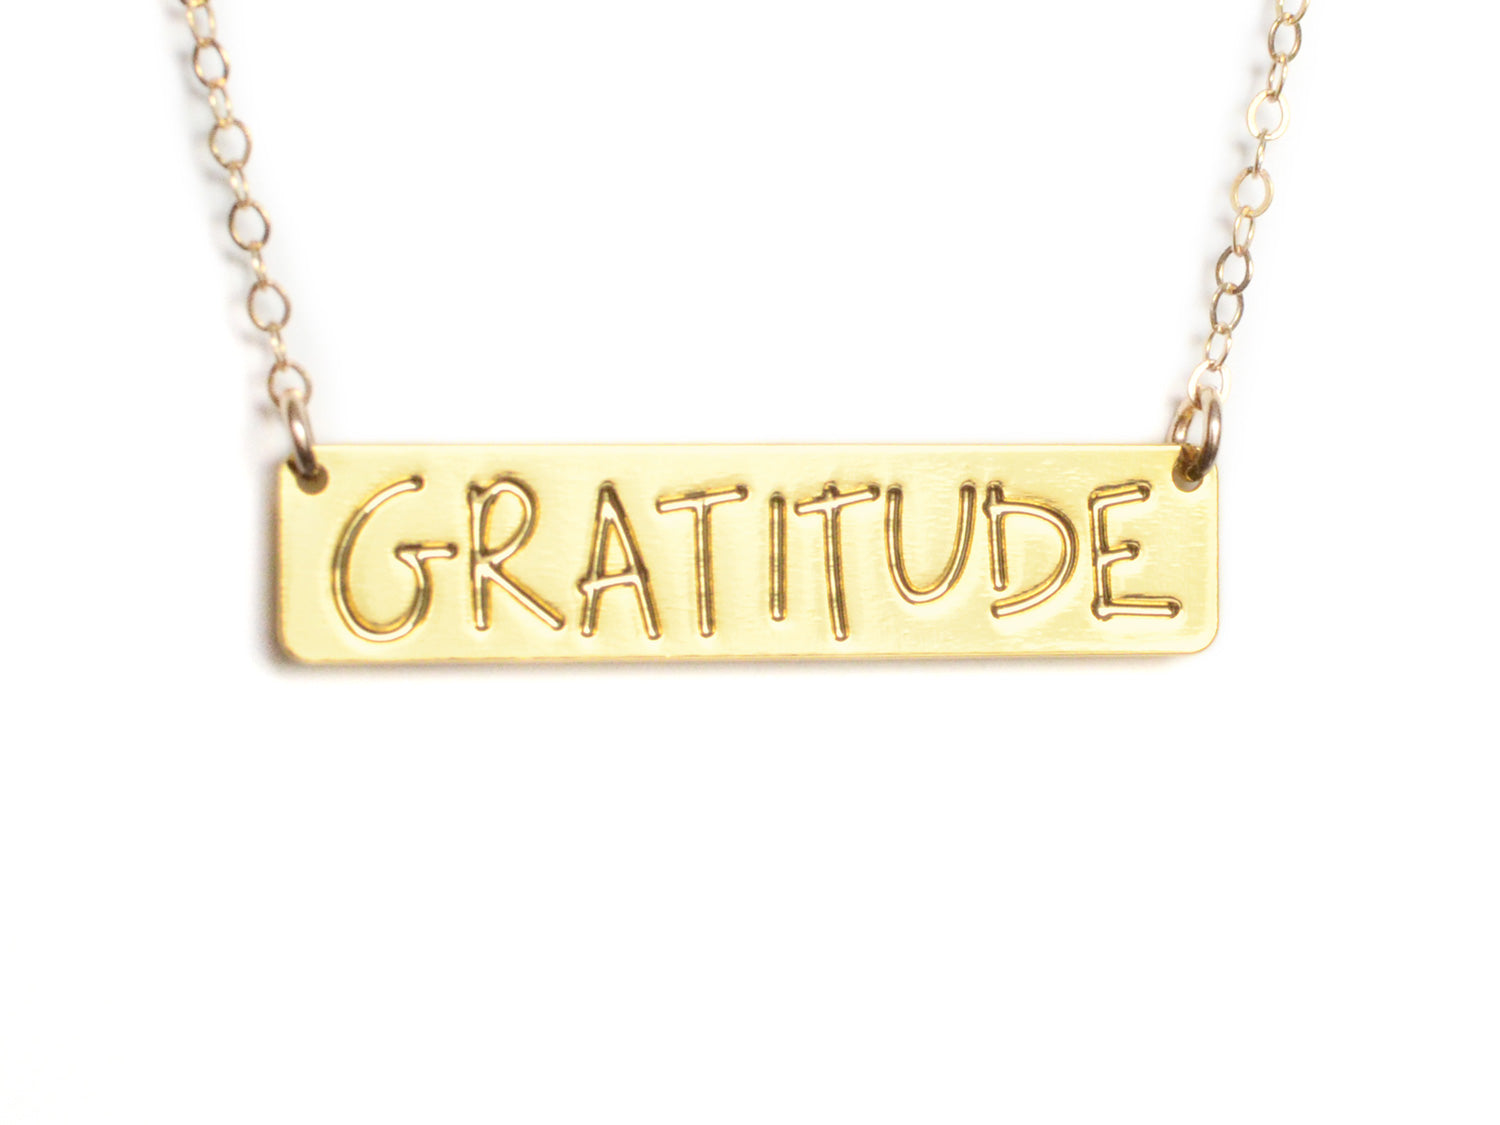 Gratitude Bar Necklace - High Quality, Affordable, Hand Written, Self Love, Mantra Word Necklace - Available in Gold and Silver - Made in USA - Brevity Jewelry